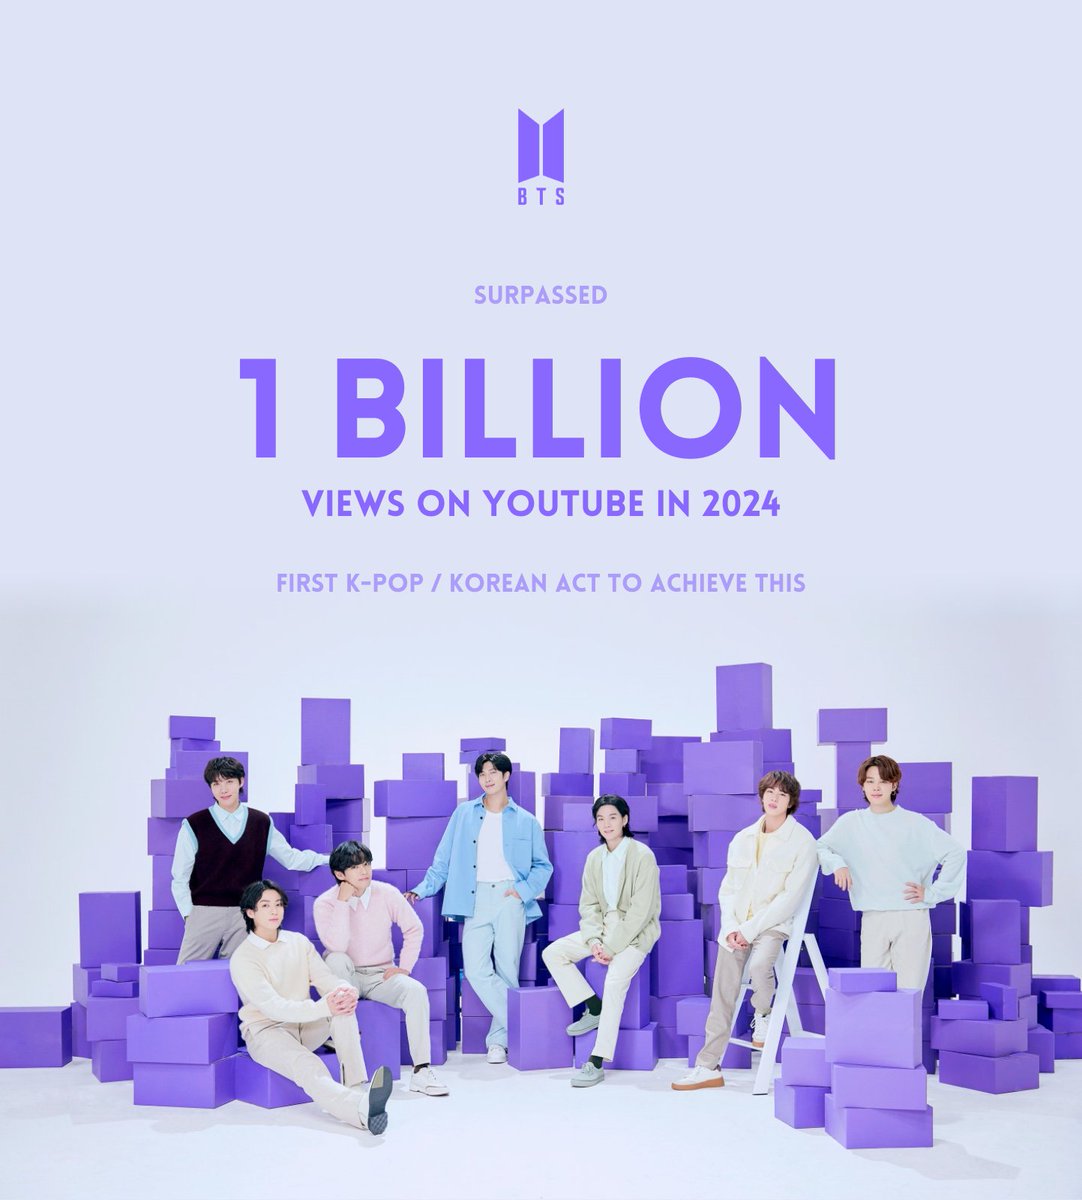 #BTS have surpassed 1 BILLION Views on YouTube in 2024, being the first K-Pop / Korean act to achieve this! CONGRATULATIONS BTS BTS PAVED THE WAY